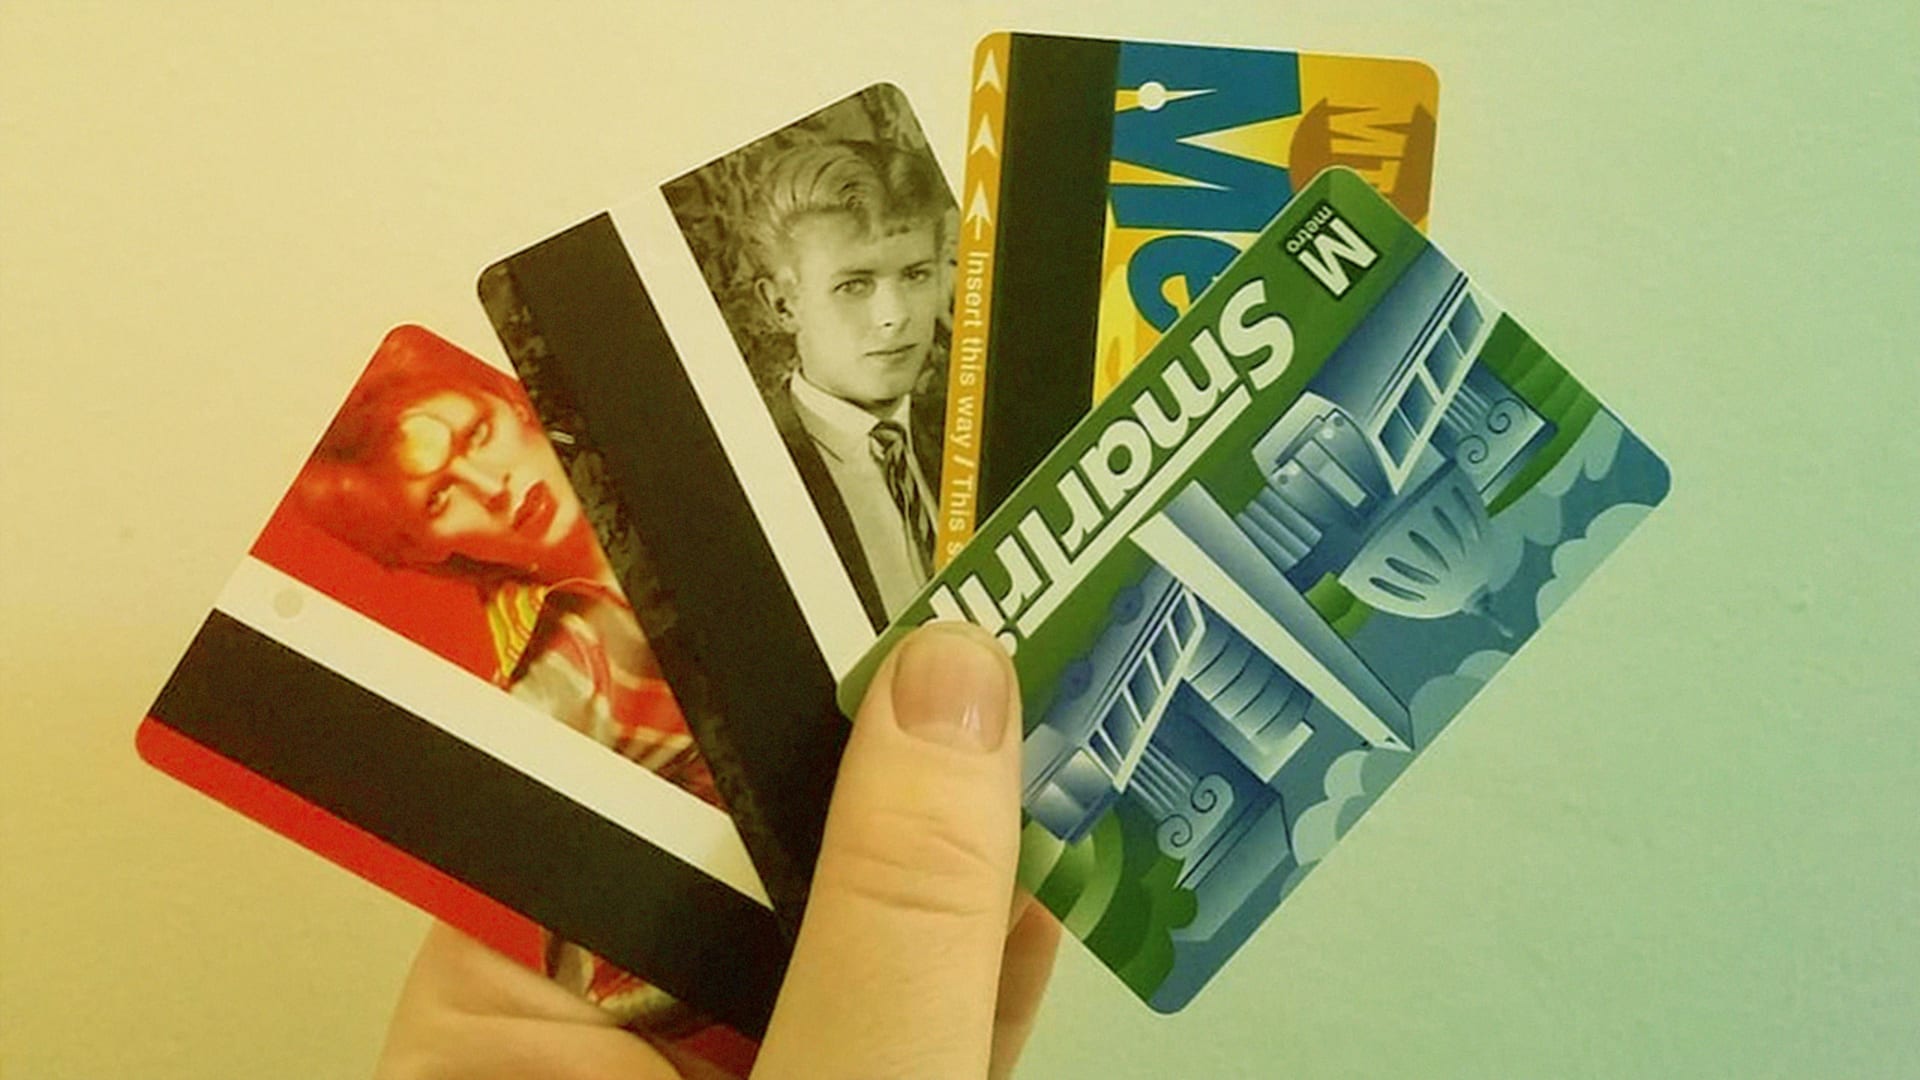 New York Subways Are Trash But These David Bowie Metrocards Are Good